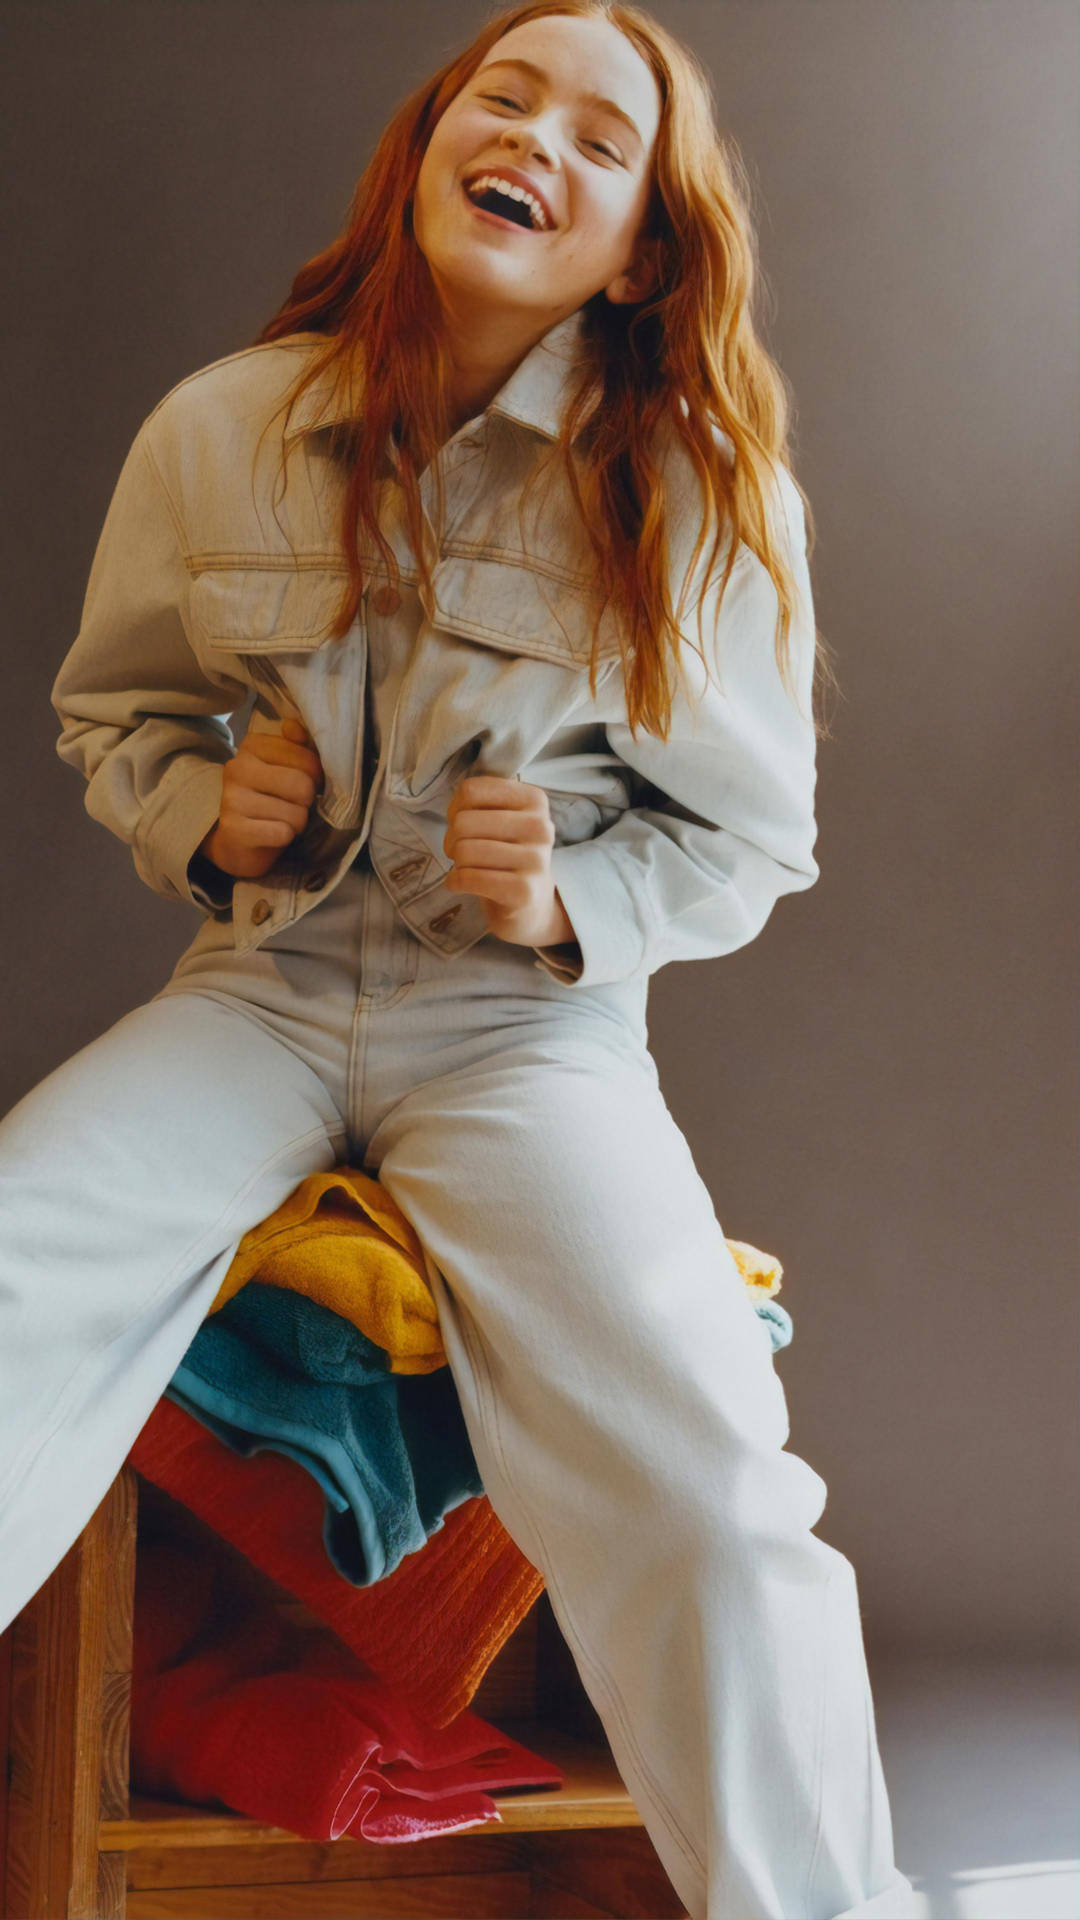 Sadie Sink In Gray Outfit Wallpaper